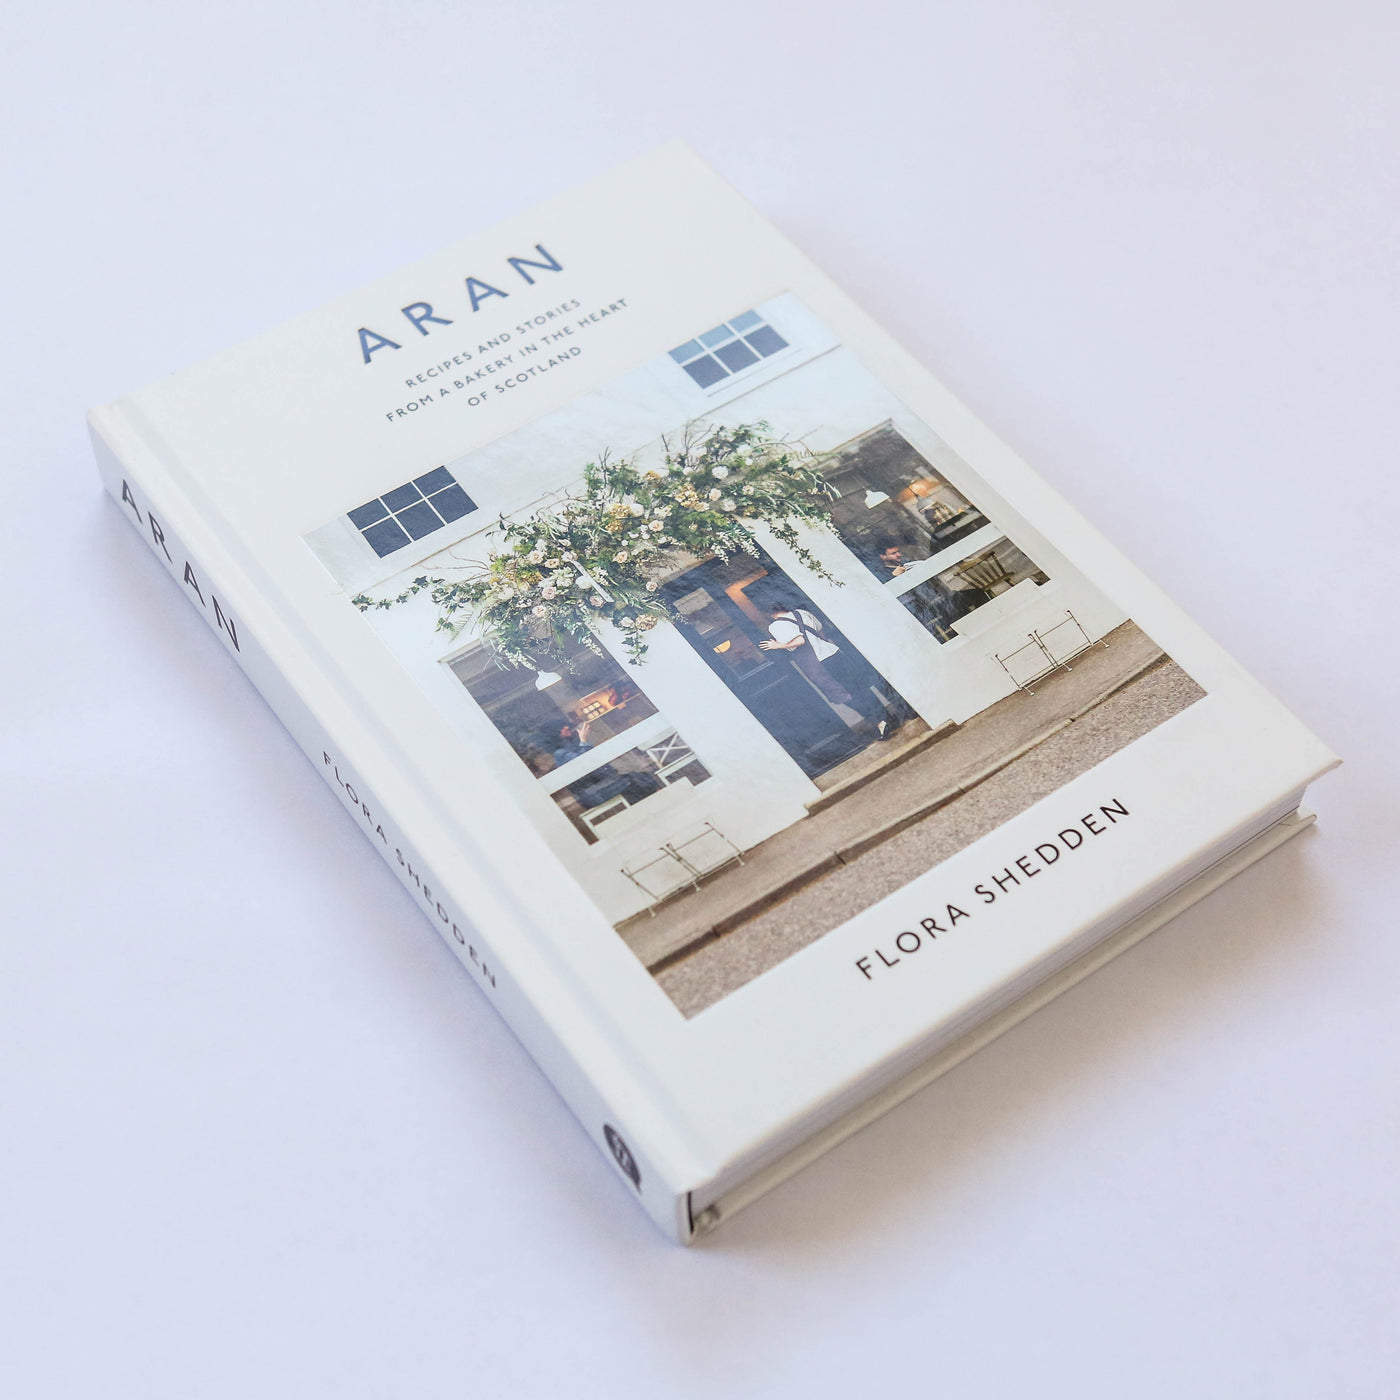 Aran : Recipes and Stories from a Bakery in the Heart of Scotland Book